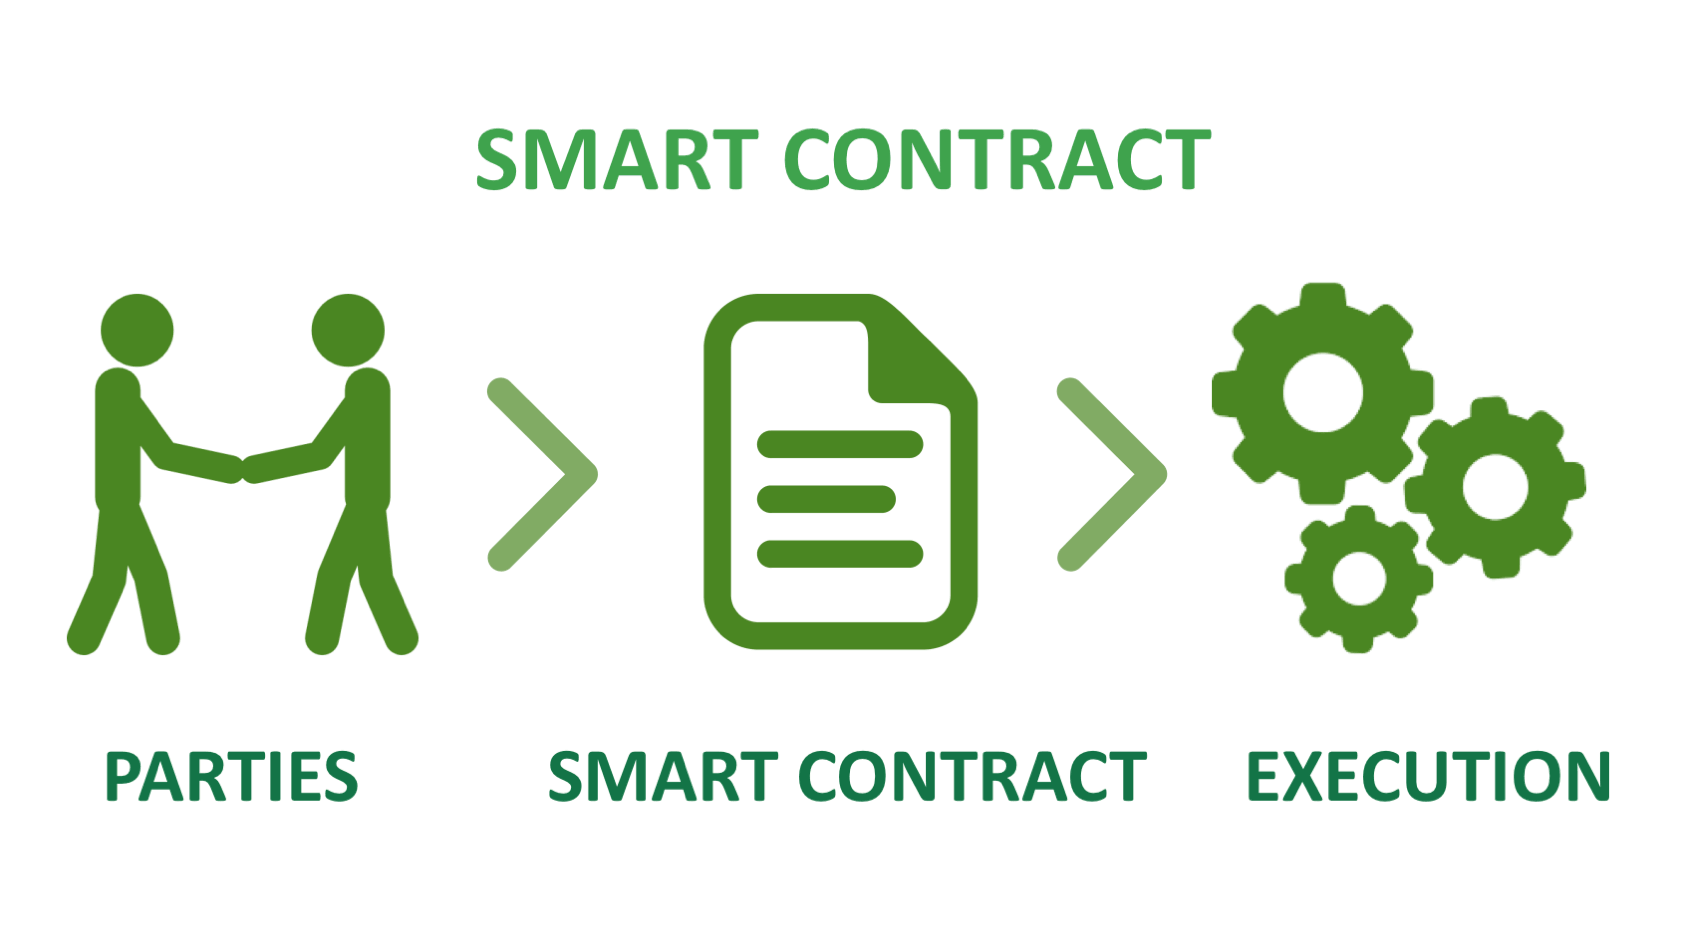 What is Smart Contract in Blockchain Technology?